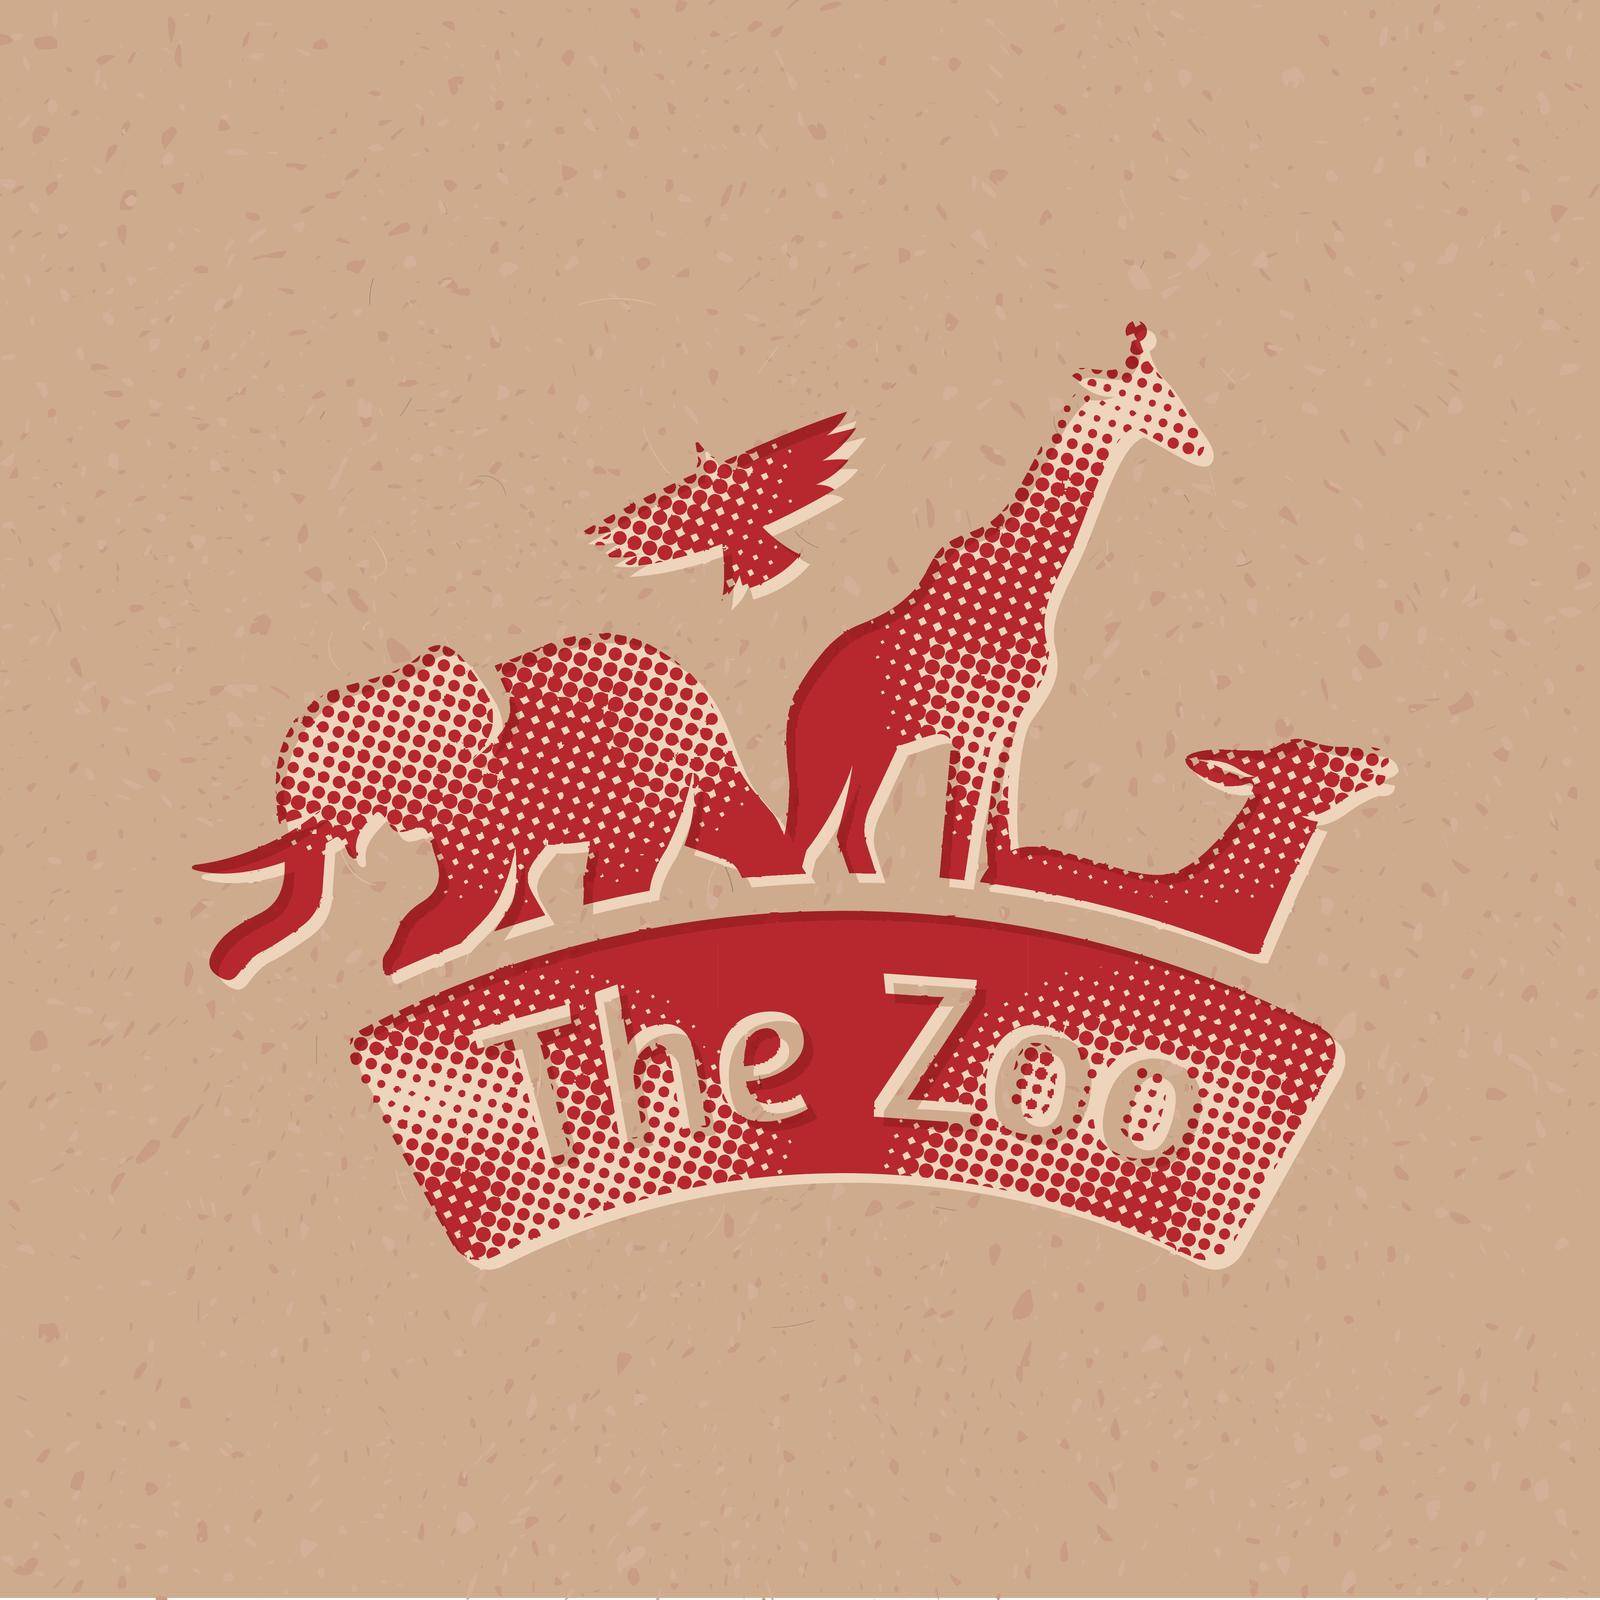 Zoo gate icon in halftone style. Grunge background vector illustration.